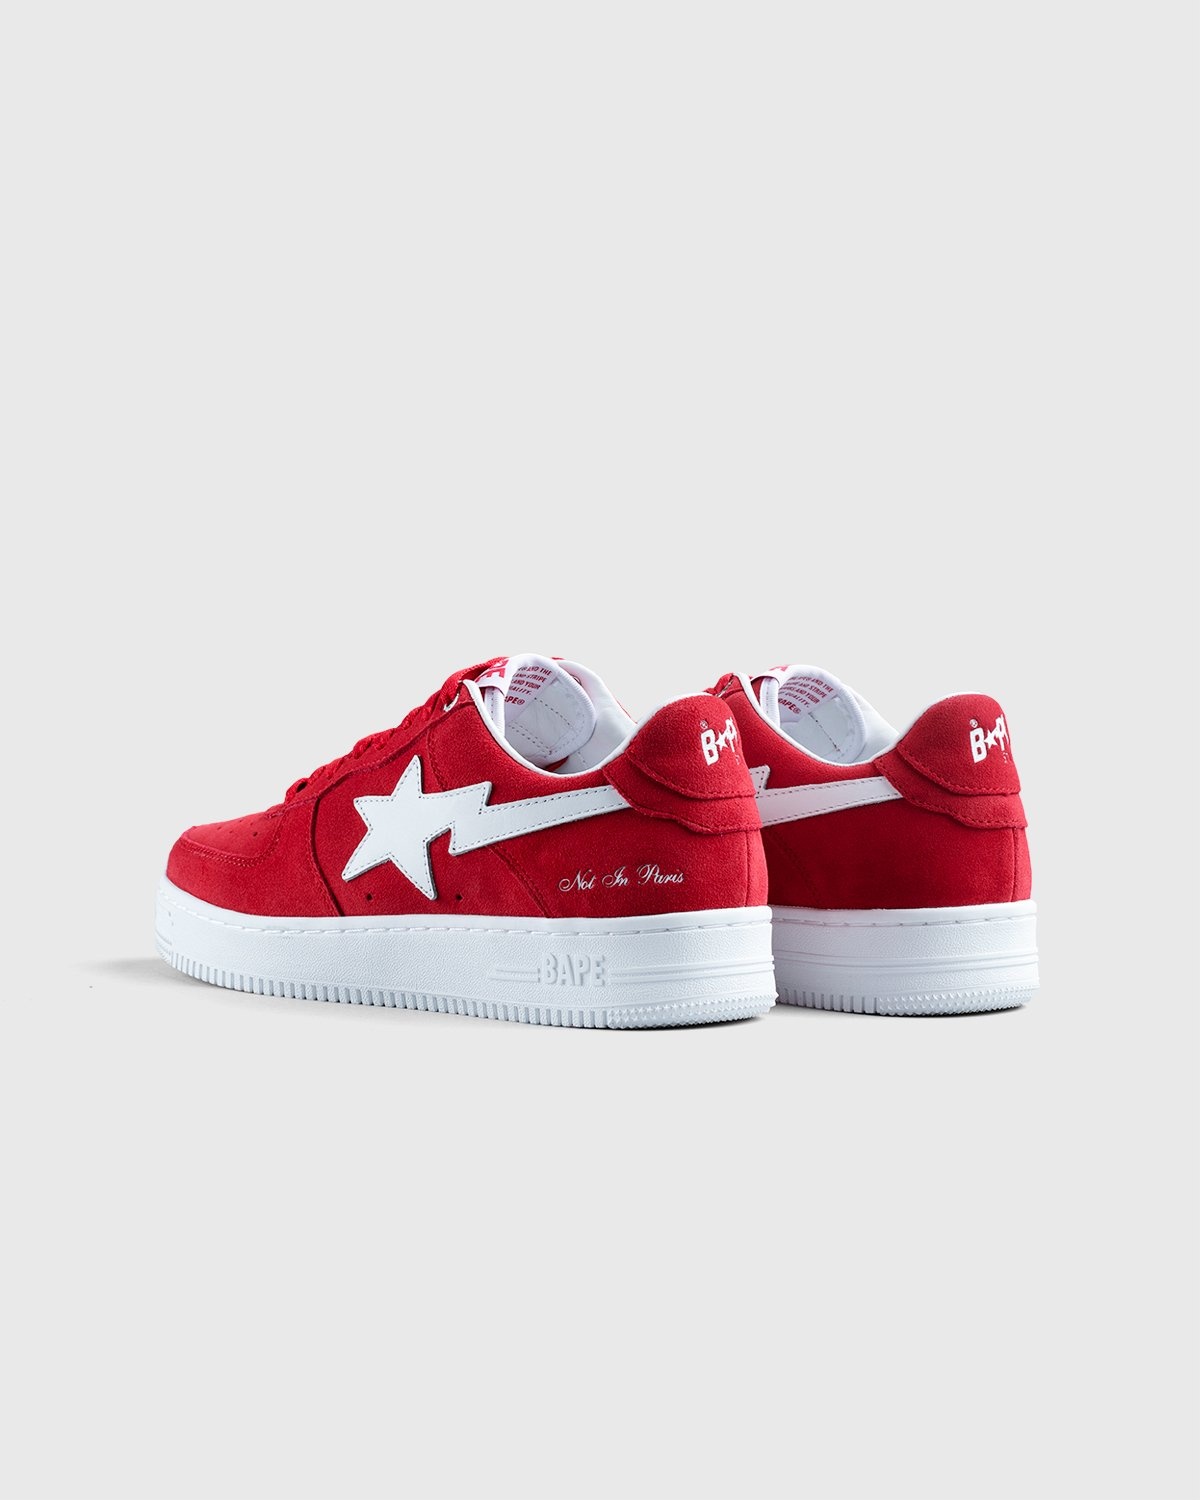 BAPE x Highsnobiety – BAPE STA Red - Sneakers - Red - Image 3